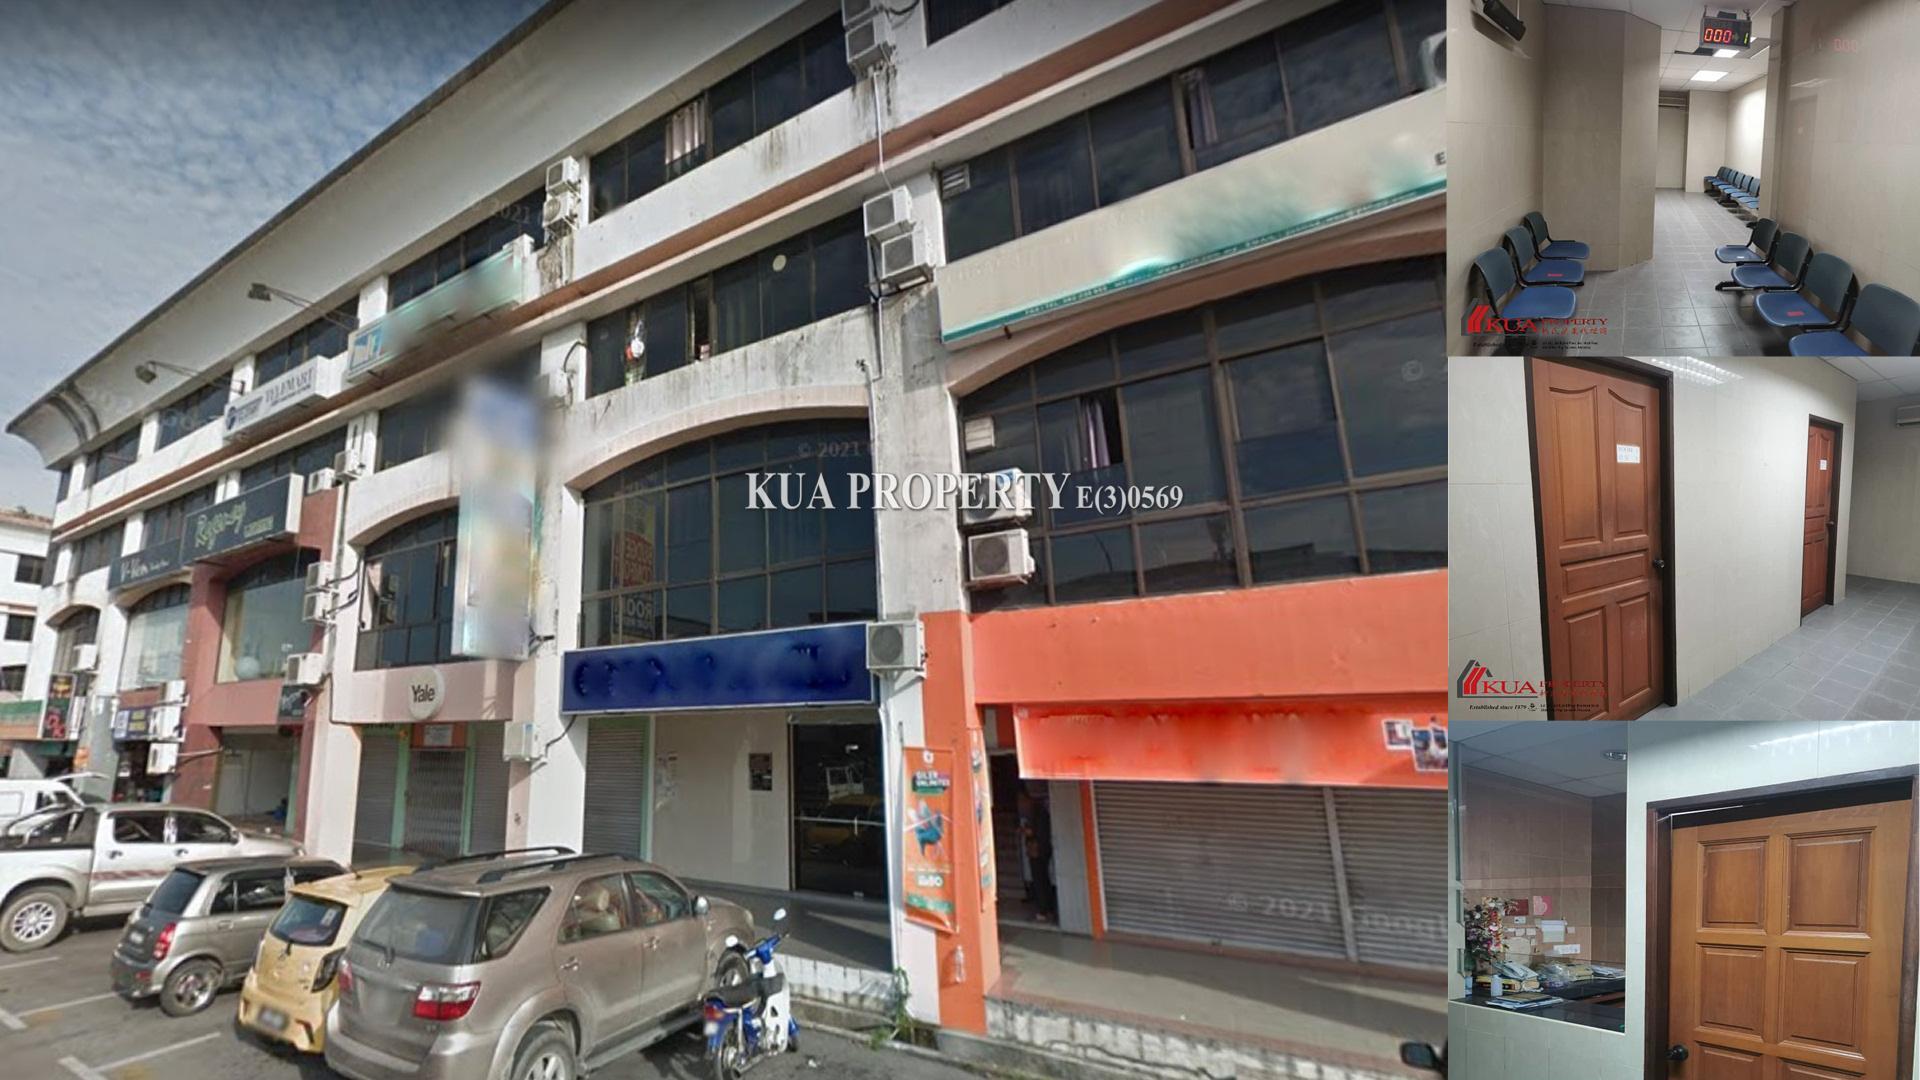 Ground Floor Shoplot (Facing Main Road) For Rent! at 3rd Mile, Kuching